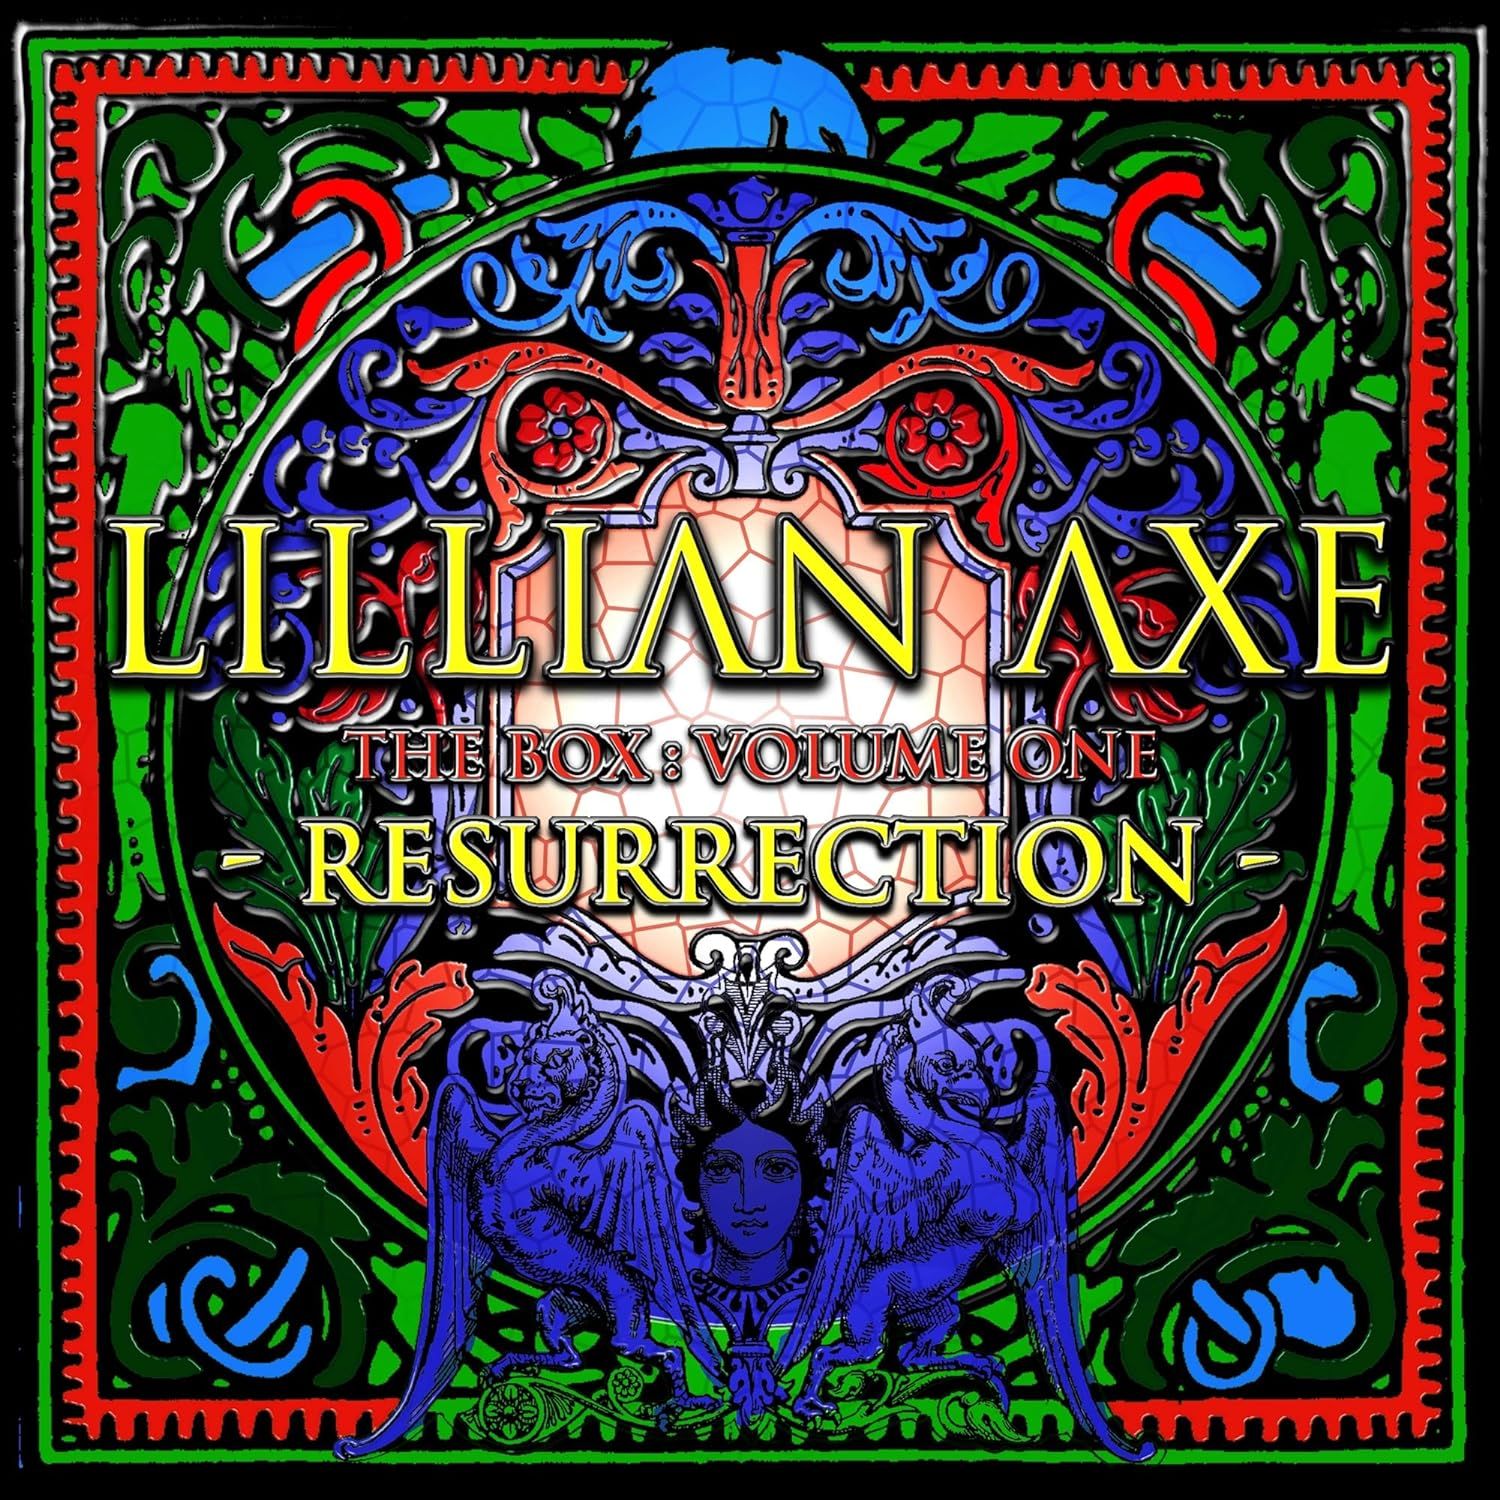 Lillian Axe - Box, The: Volume One - Resurrection (Poetic Justice/Psychoschizophrenia/Live 2002/Waters Rising/Sad Day On Planet Earth/Random Acts Of Blindness) (7CD Box Set) - CD - New